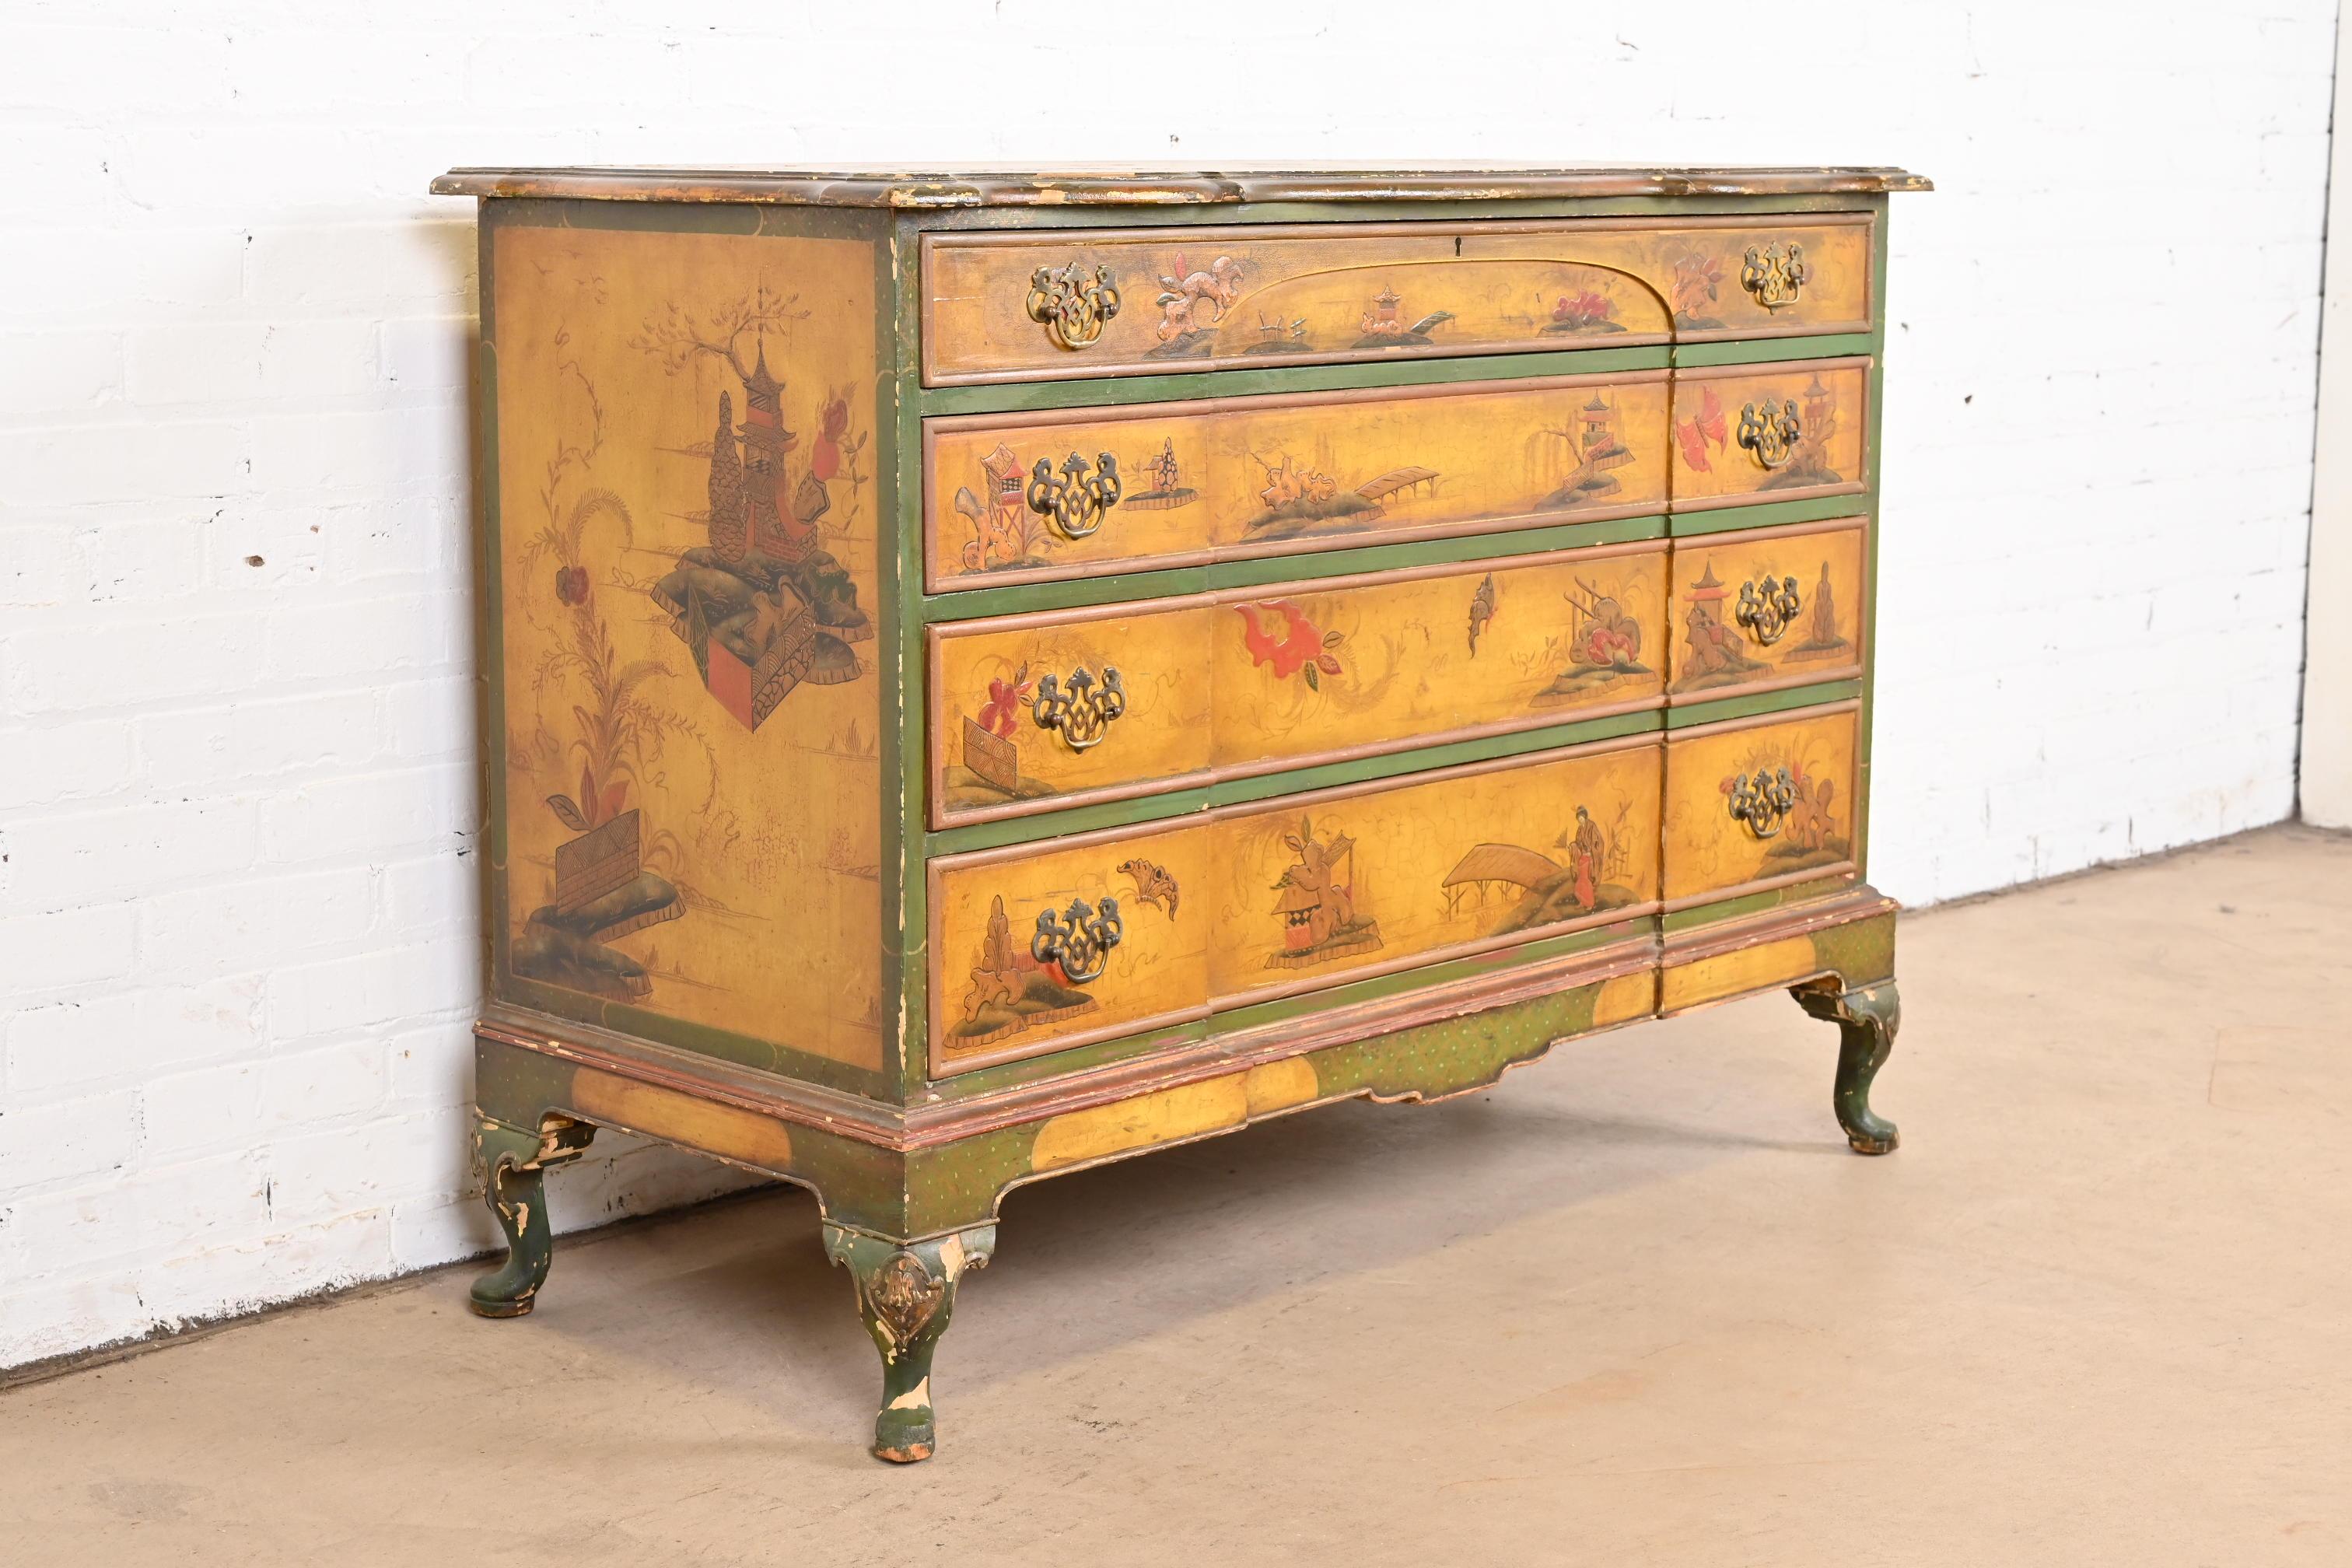 Early 20th Century Antique Japanned Chinoiserie Queen Anne Bureau From Historic Edgecroft Mansion For Sale